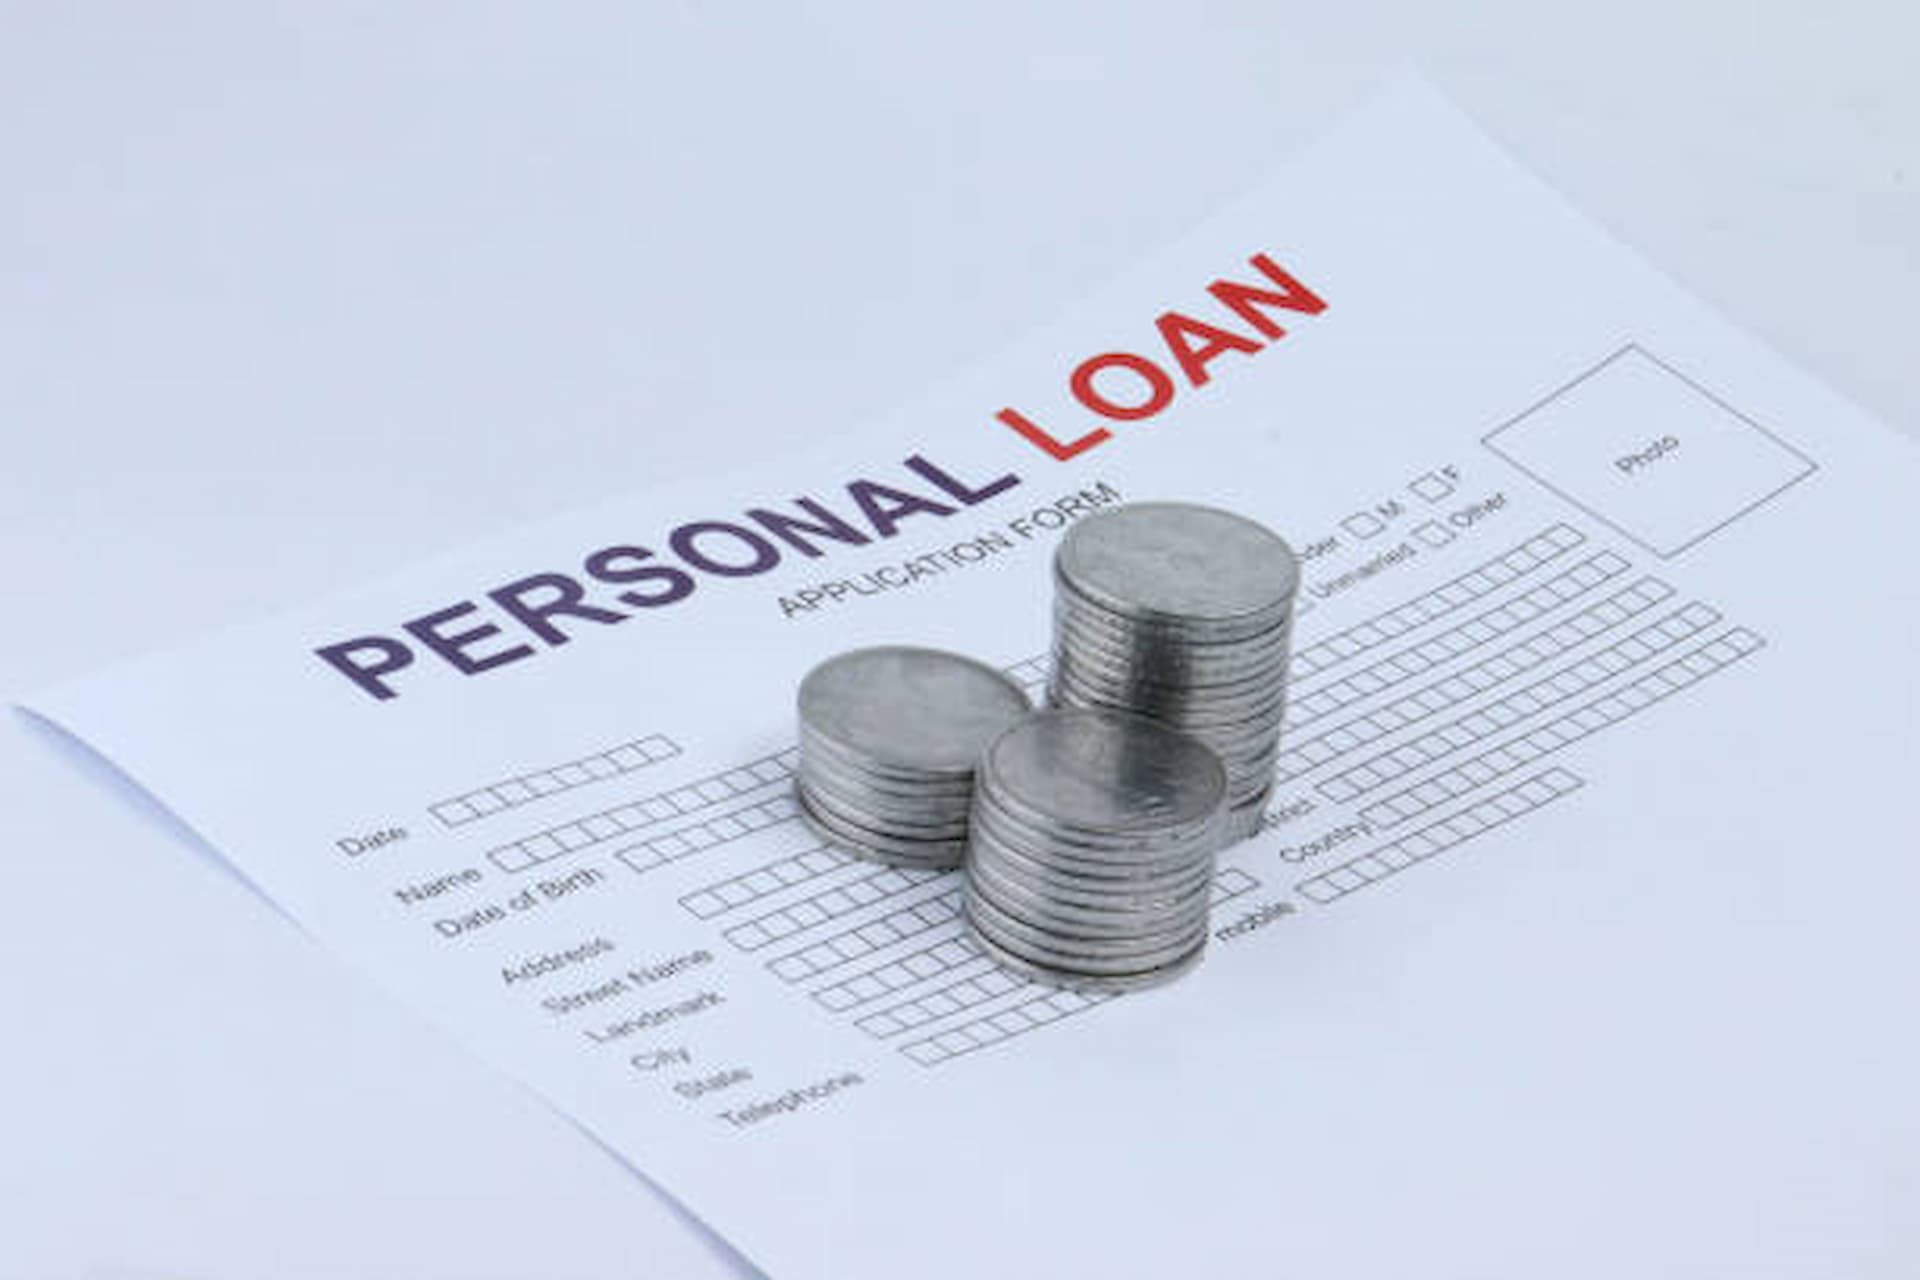 Finding Affordable Personal Loans Through Reputable Lenders